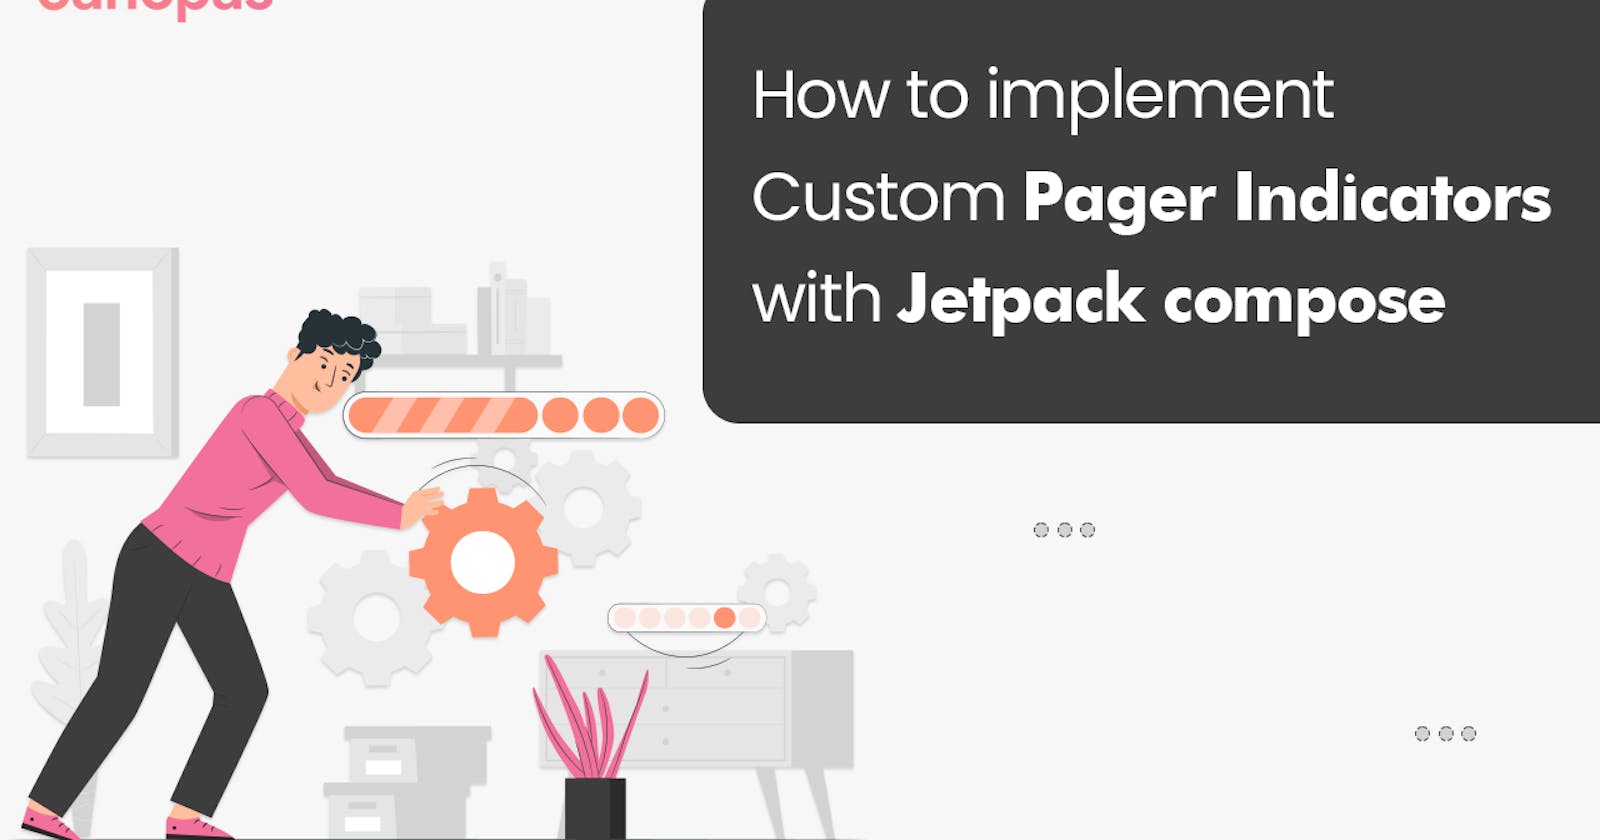 How to implement Custom Pager Indicators in Jetpack Compose